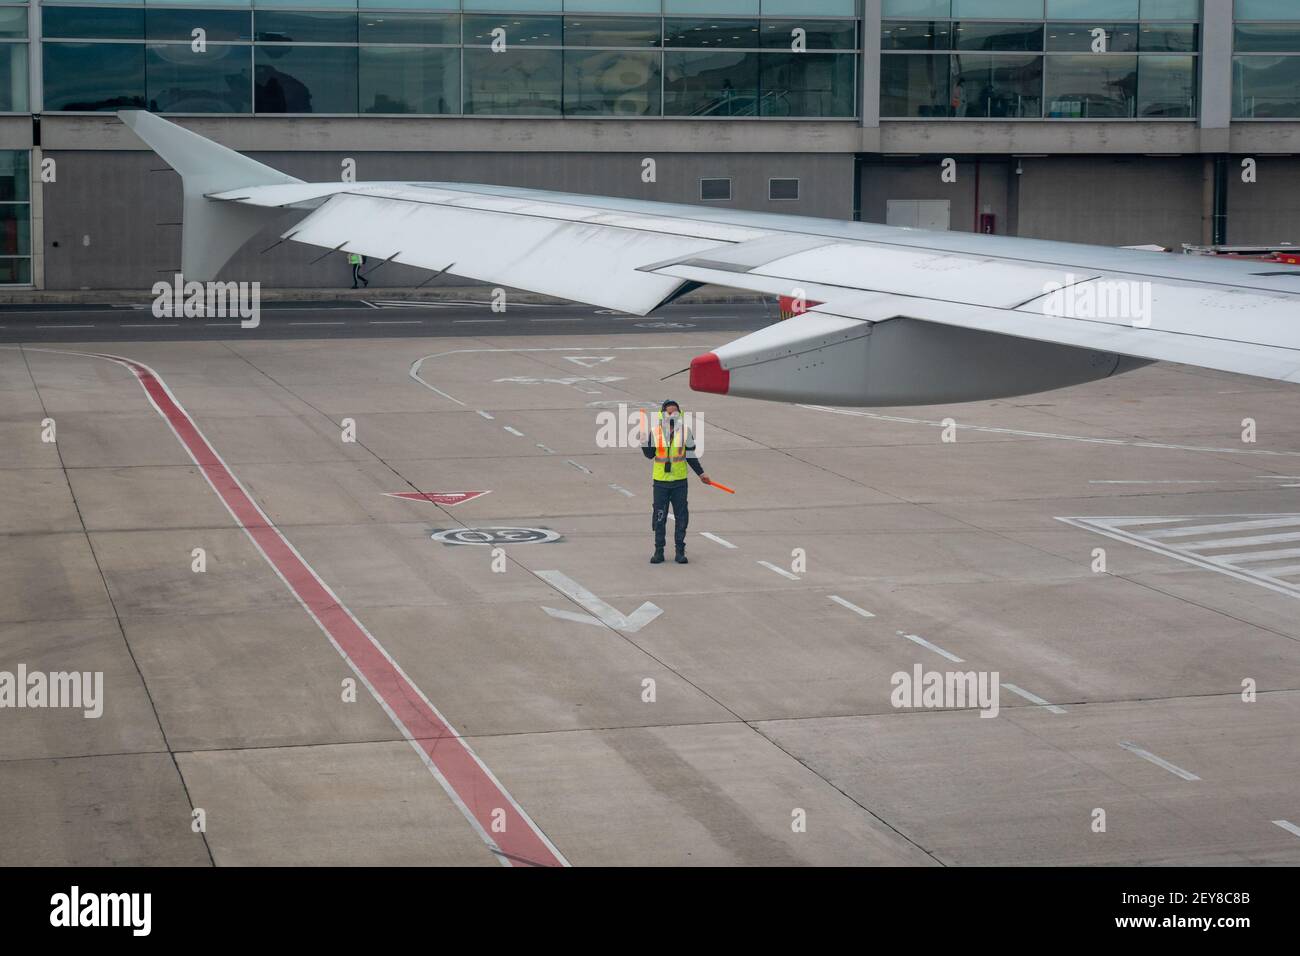 Bogota, Colombia - February 25 2021: Latin Man Wearing Mask, Yellow Vest Walks Down Runway with a Orange Cones to Indicate to Pilot when to Brake Stock Photo